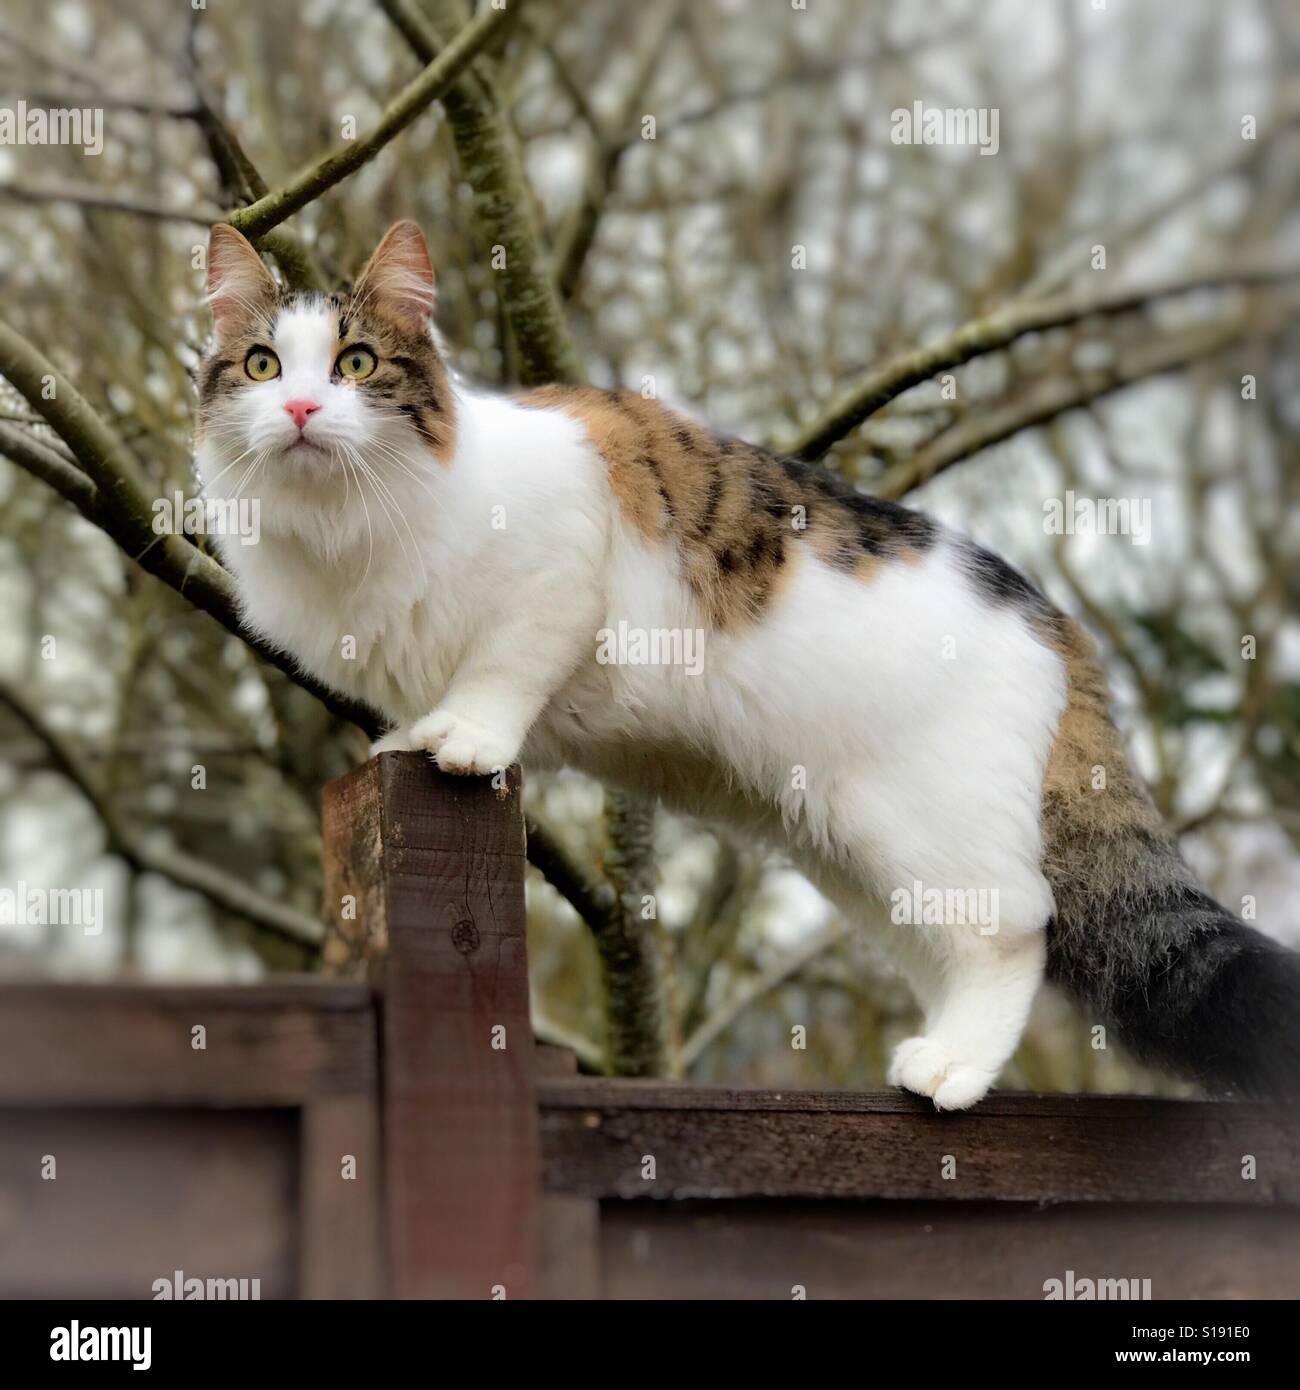 A cat climbing the fence Stock Photo